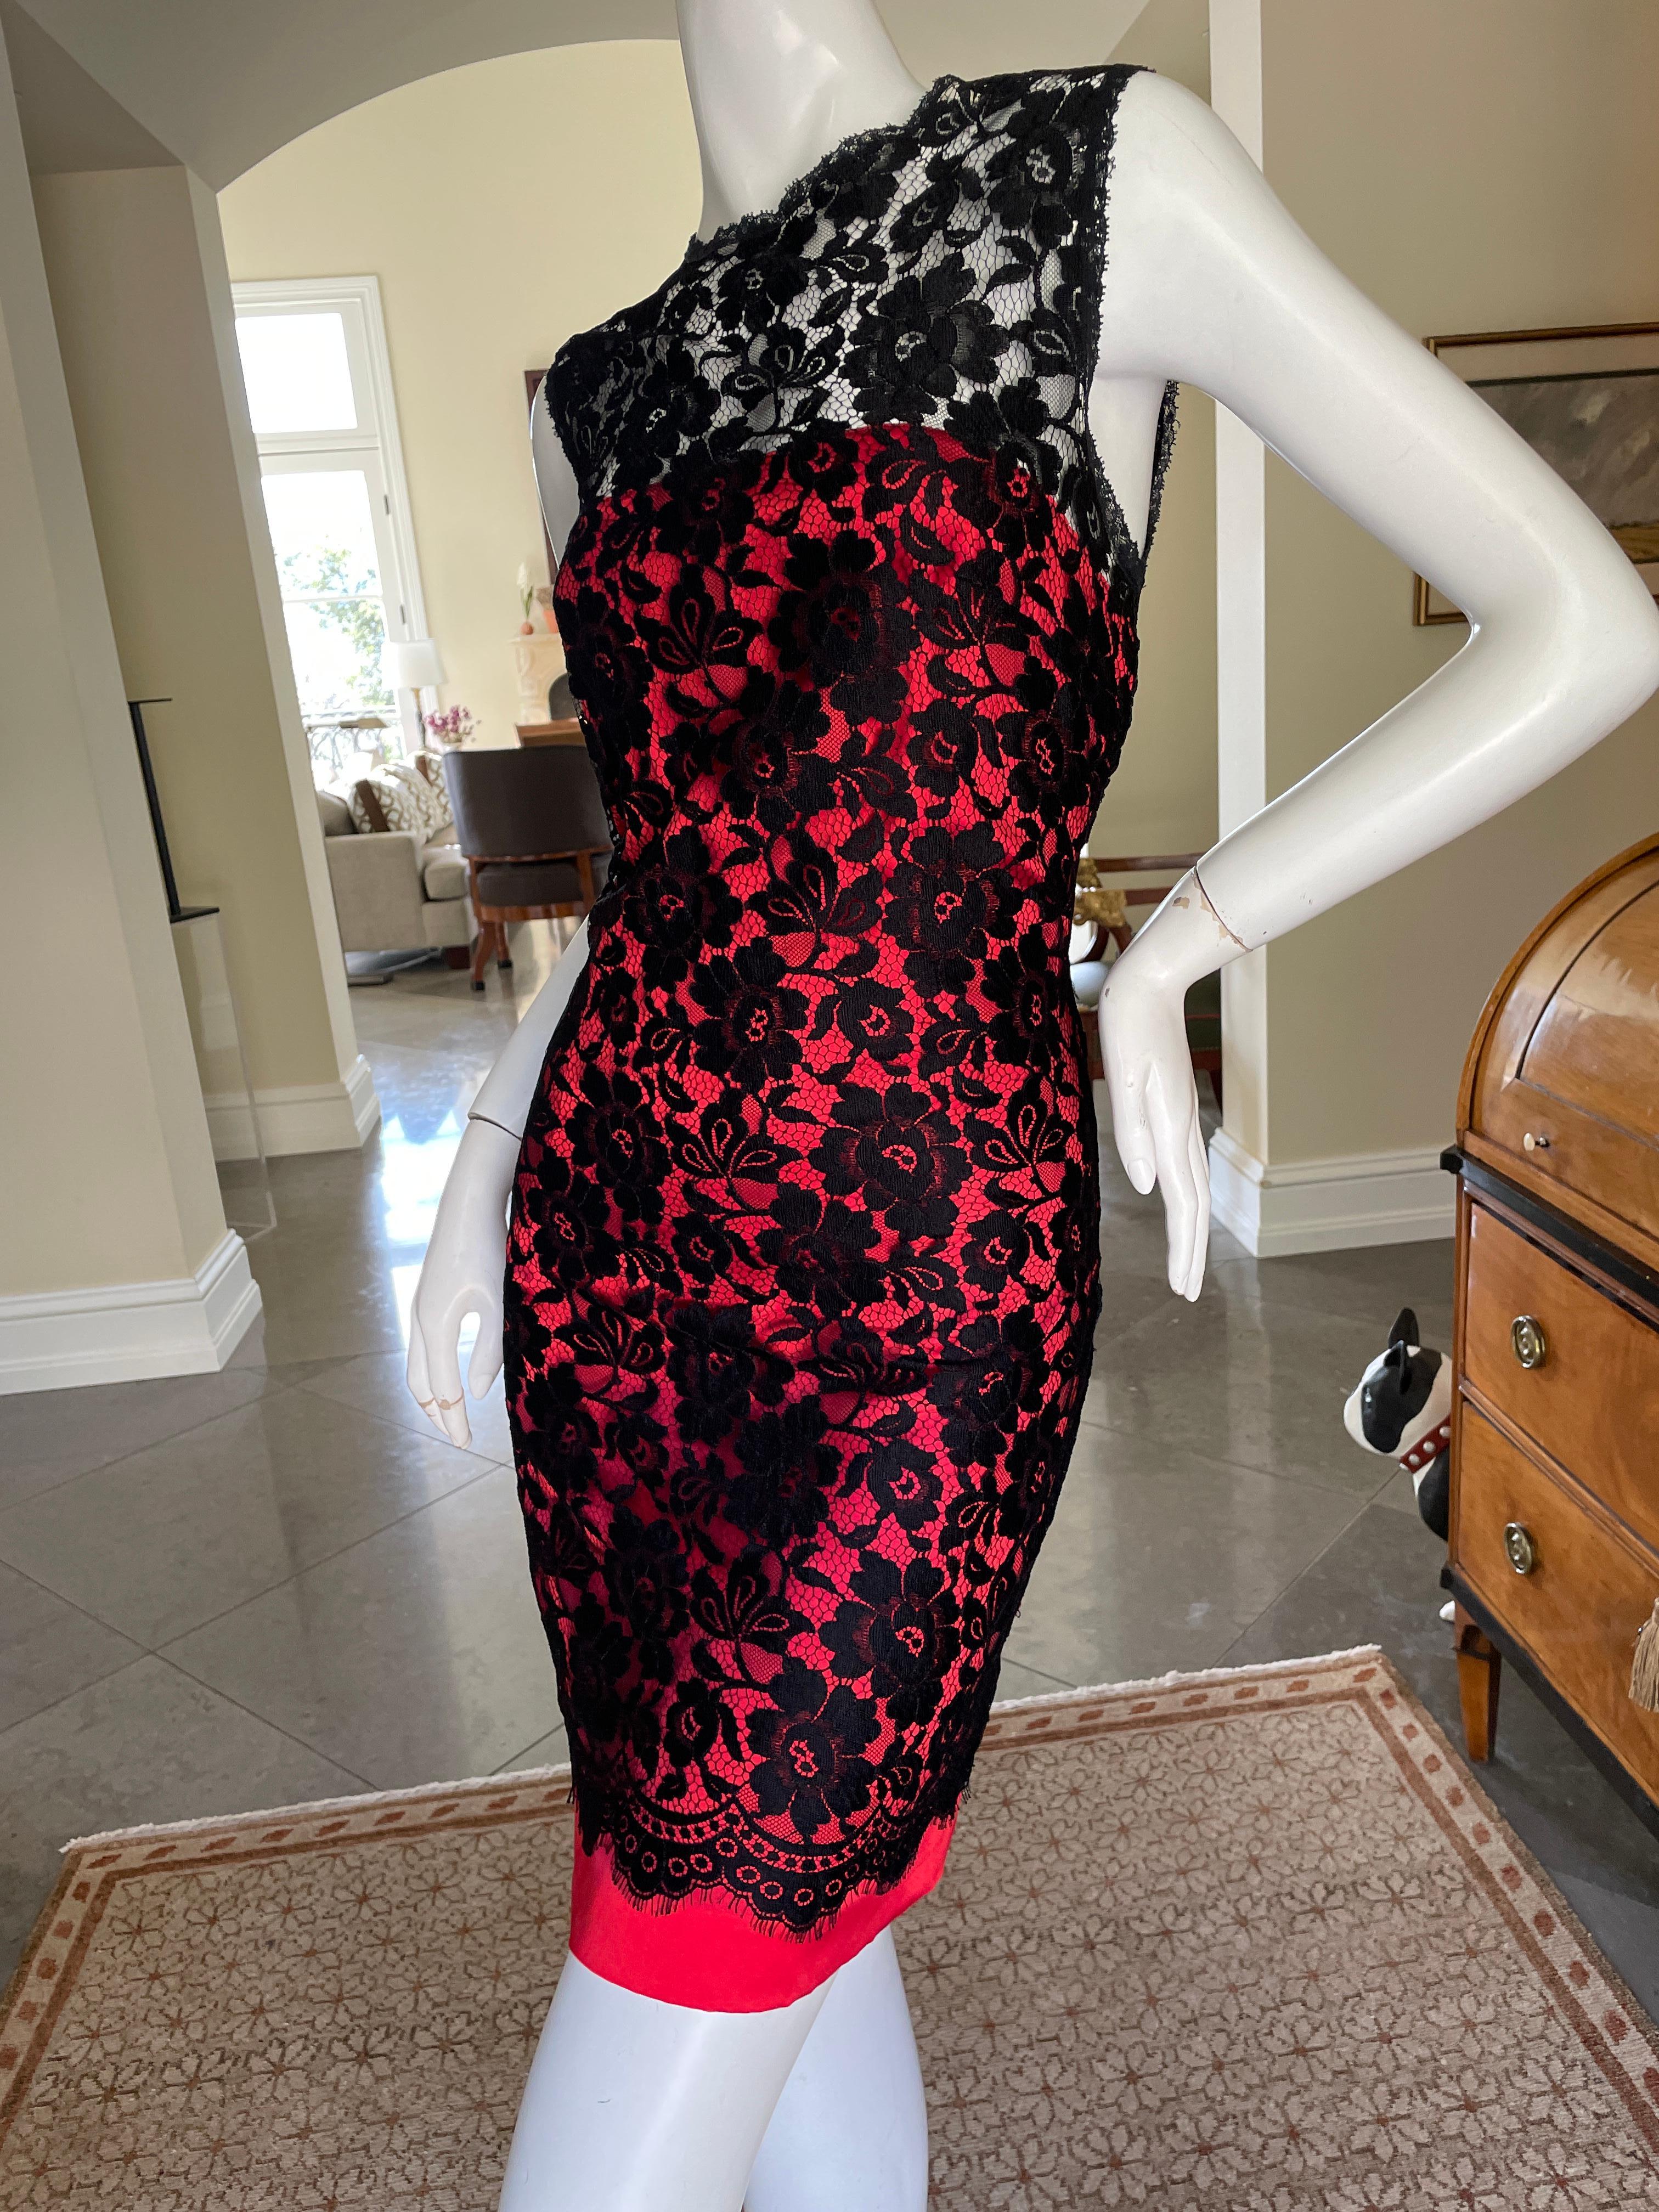 D&G by Dolce & Gabbana Vintage Black Lace Overlay Red Cocktail Dress 
  Size 36
 Bust 32